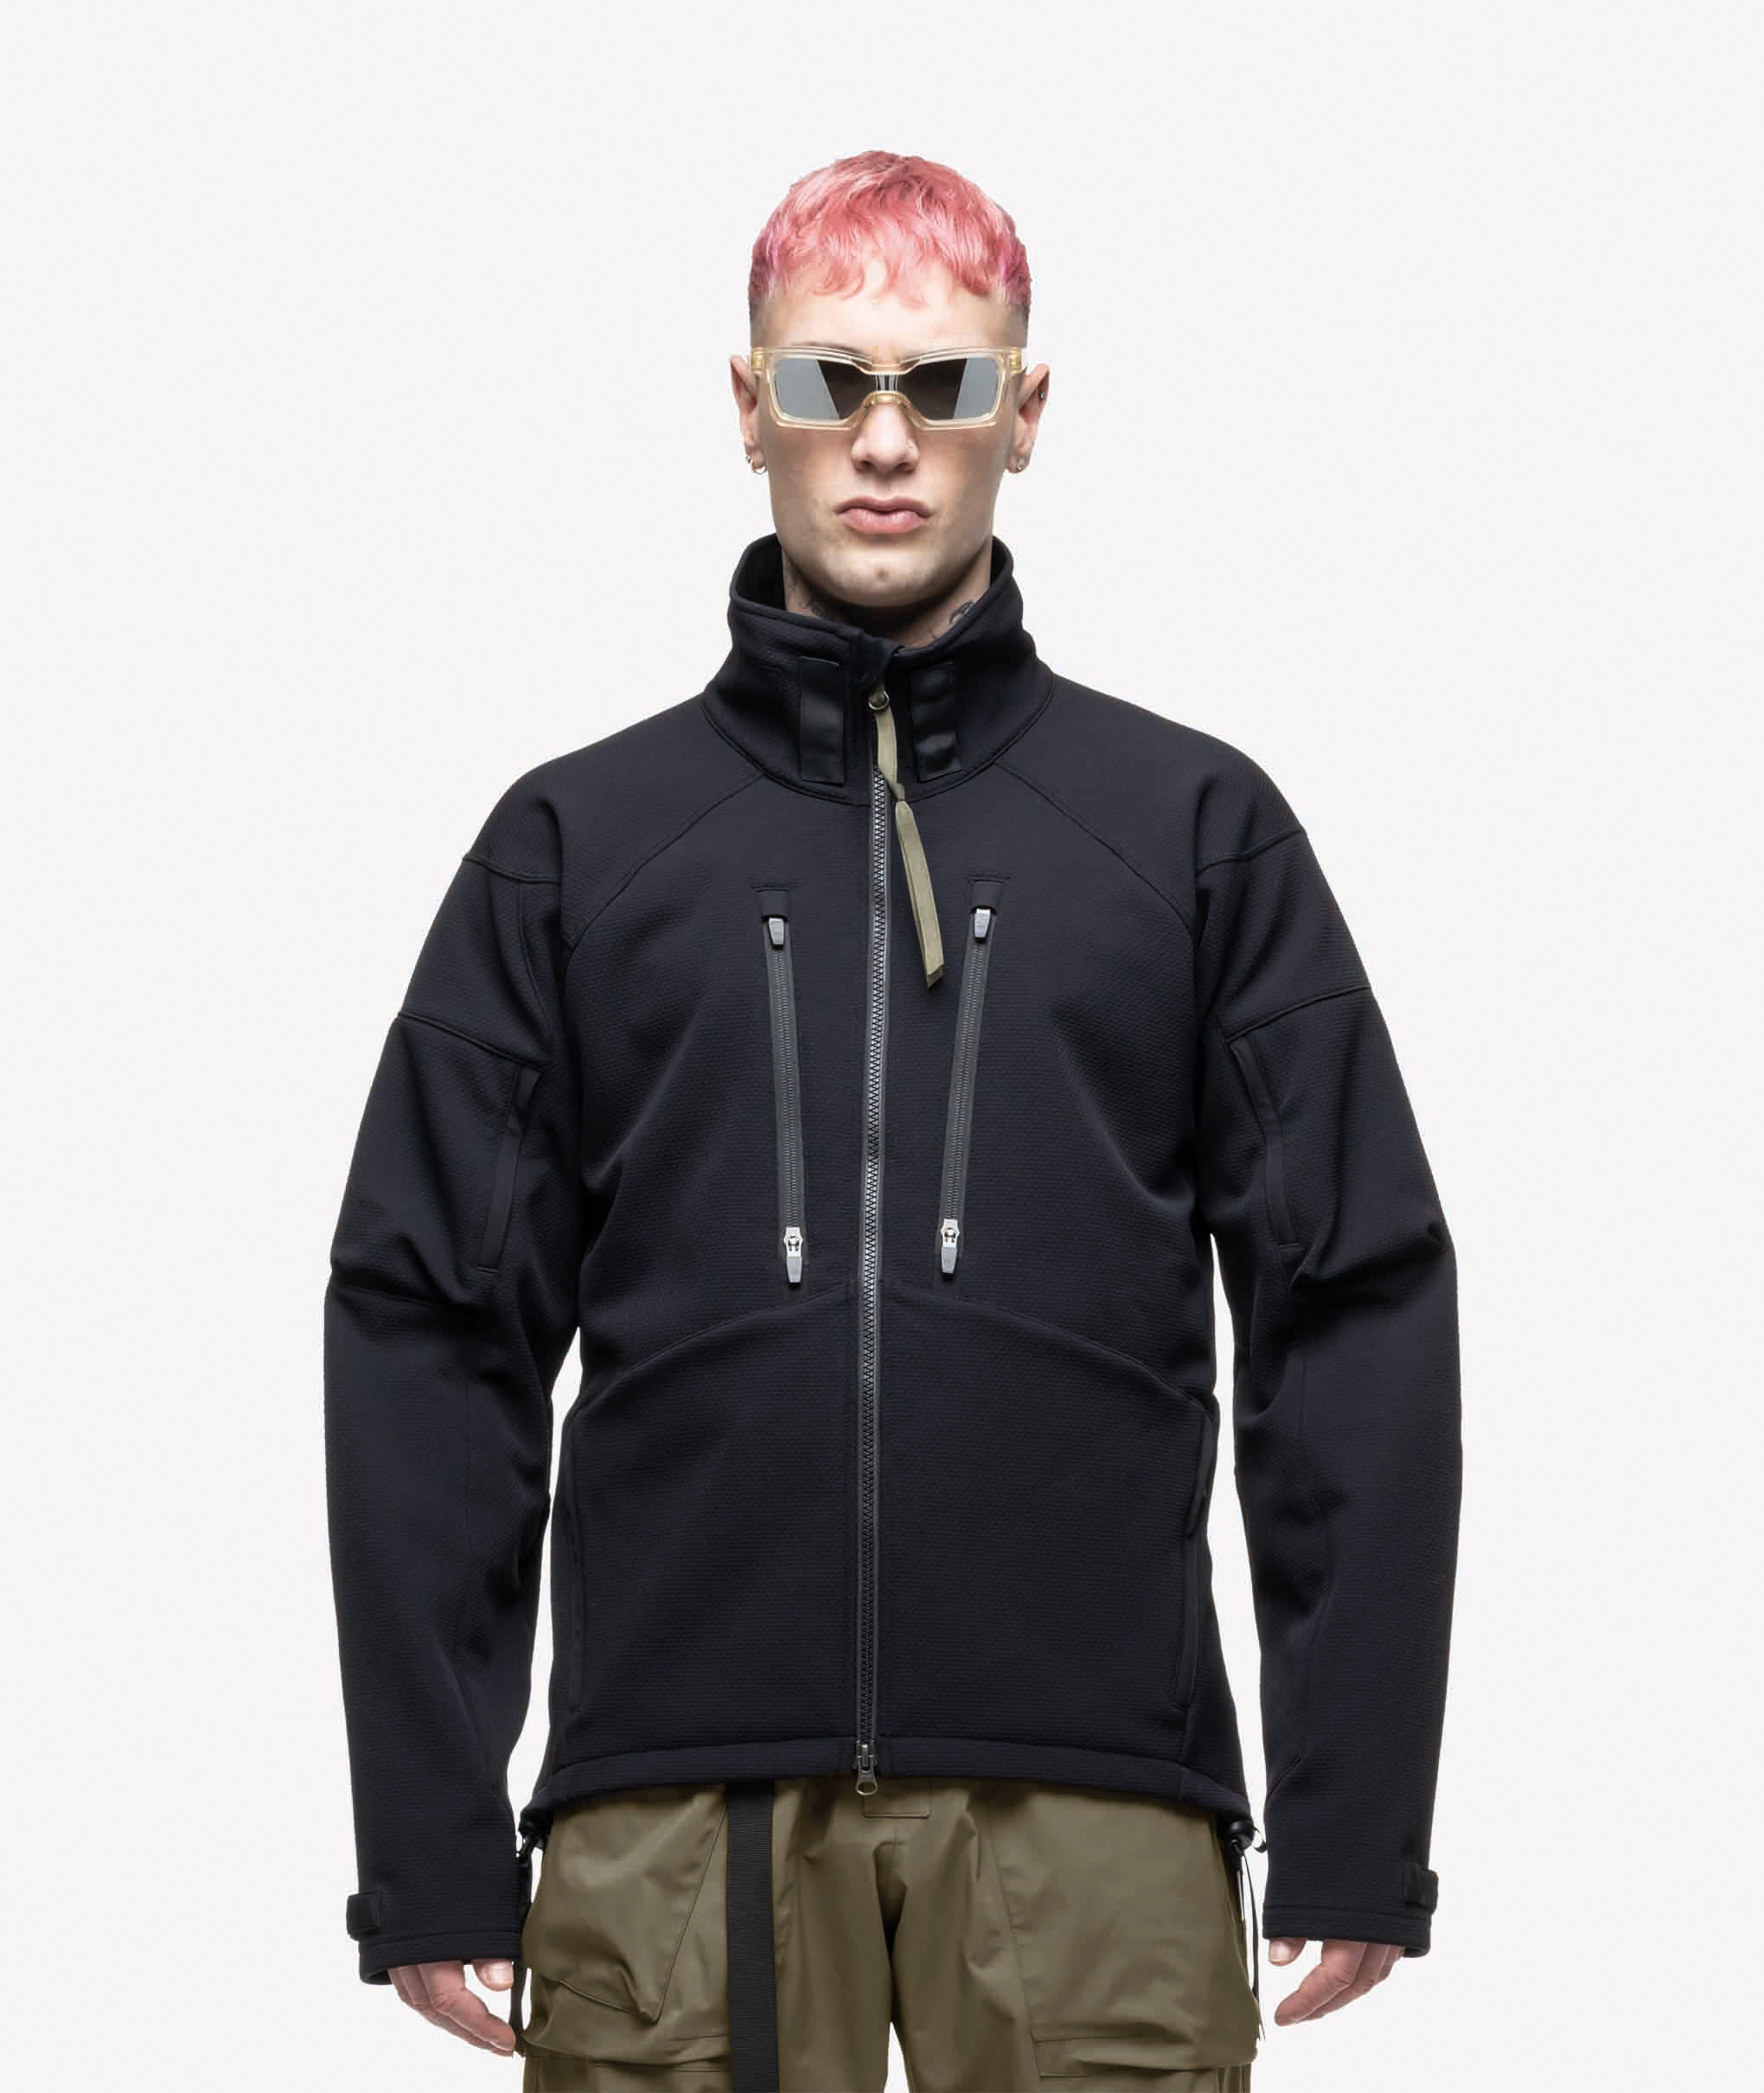 Norse Store | Shipping Worldwide - Acronym J107-SS - Black